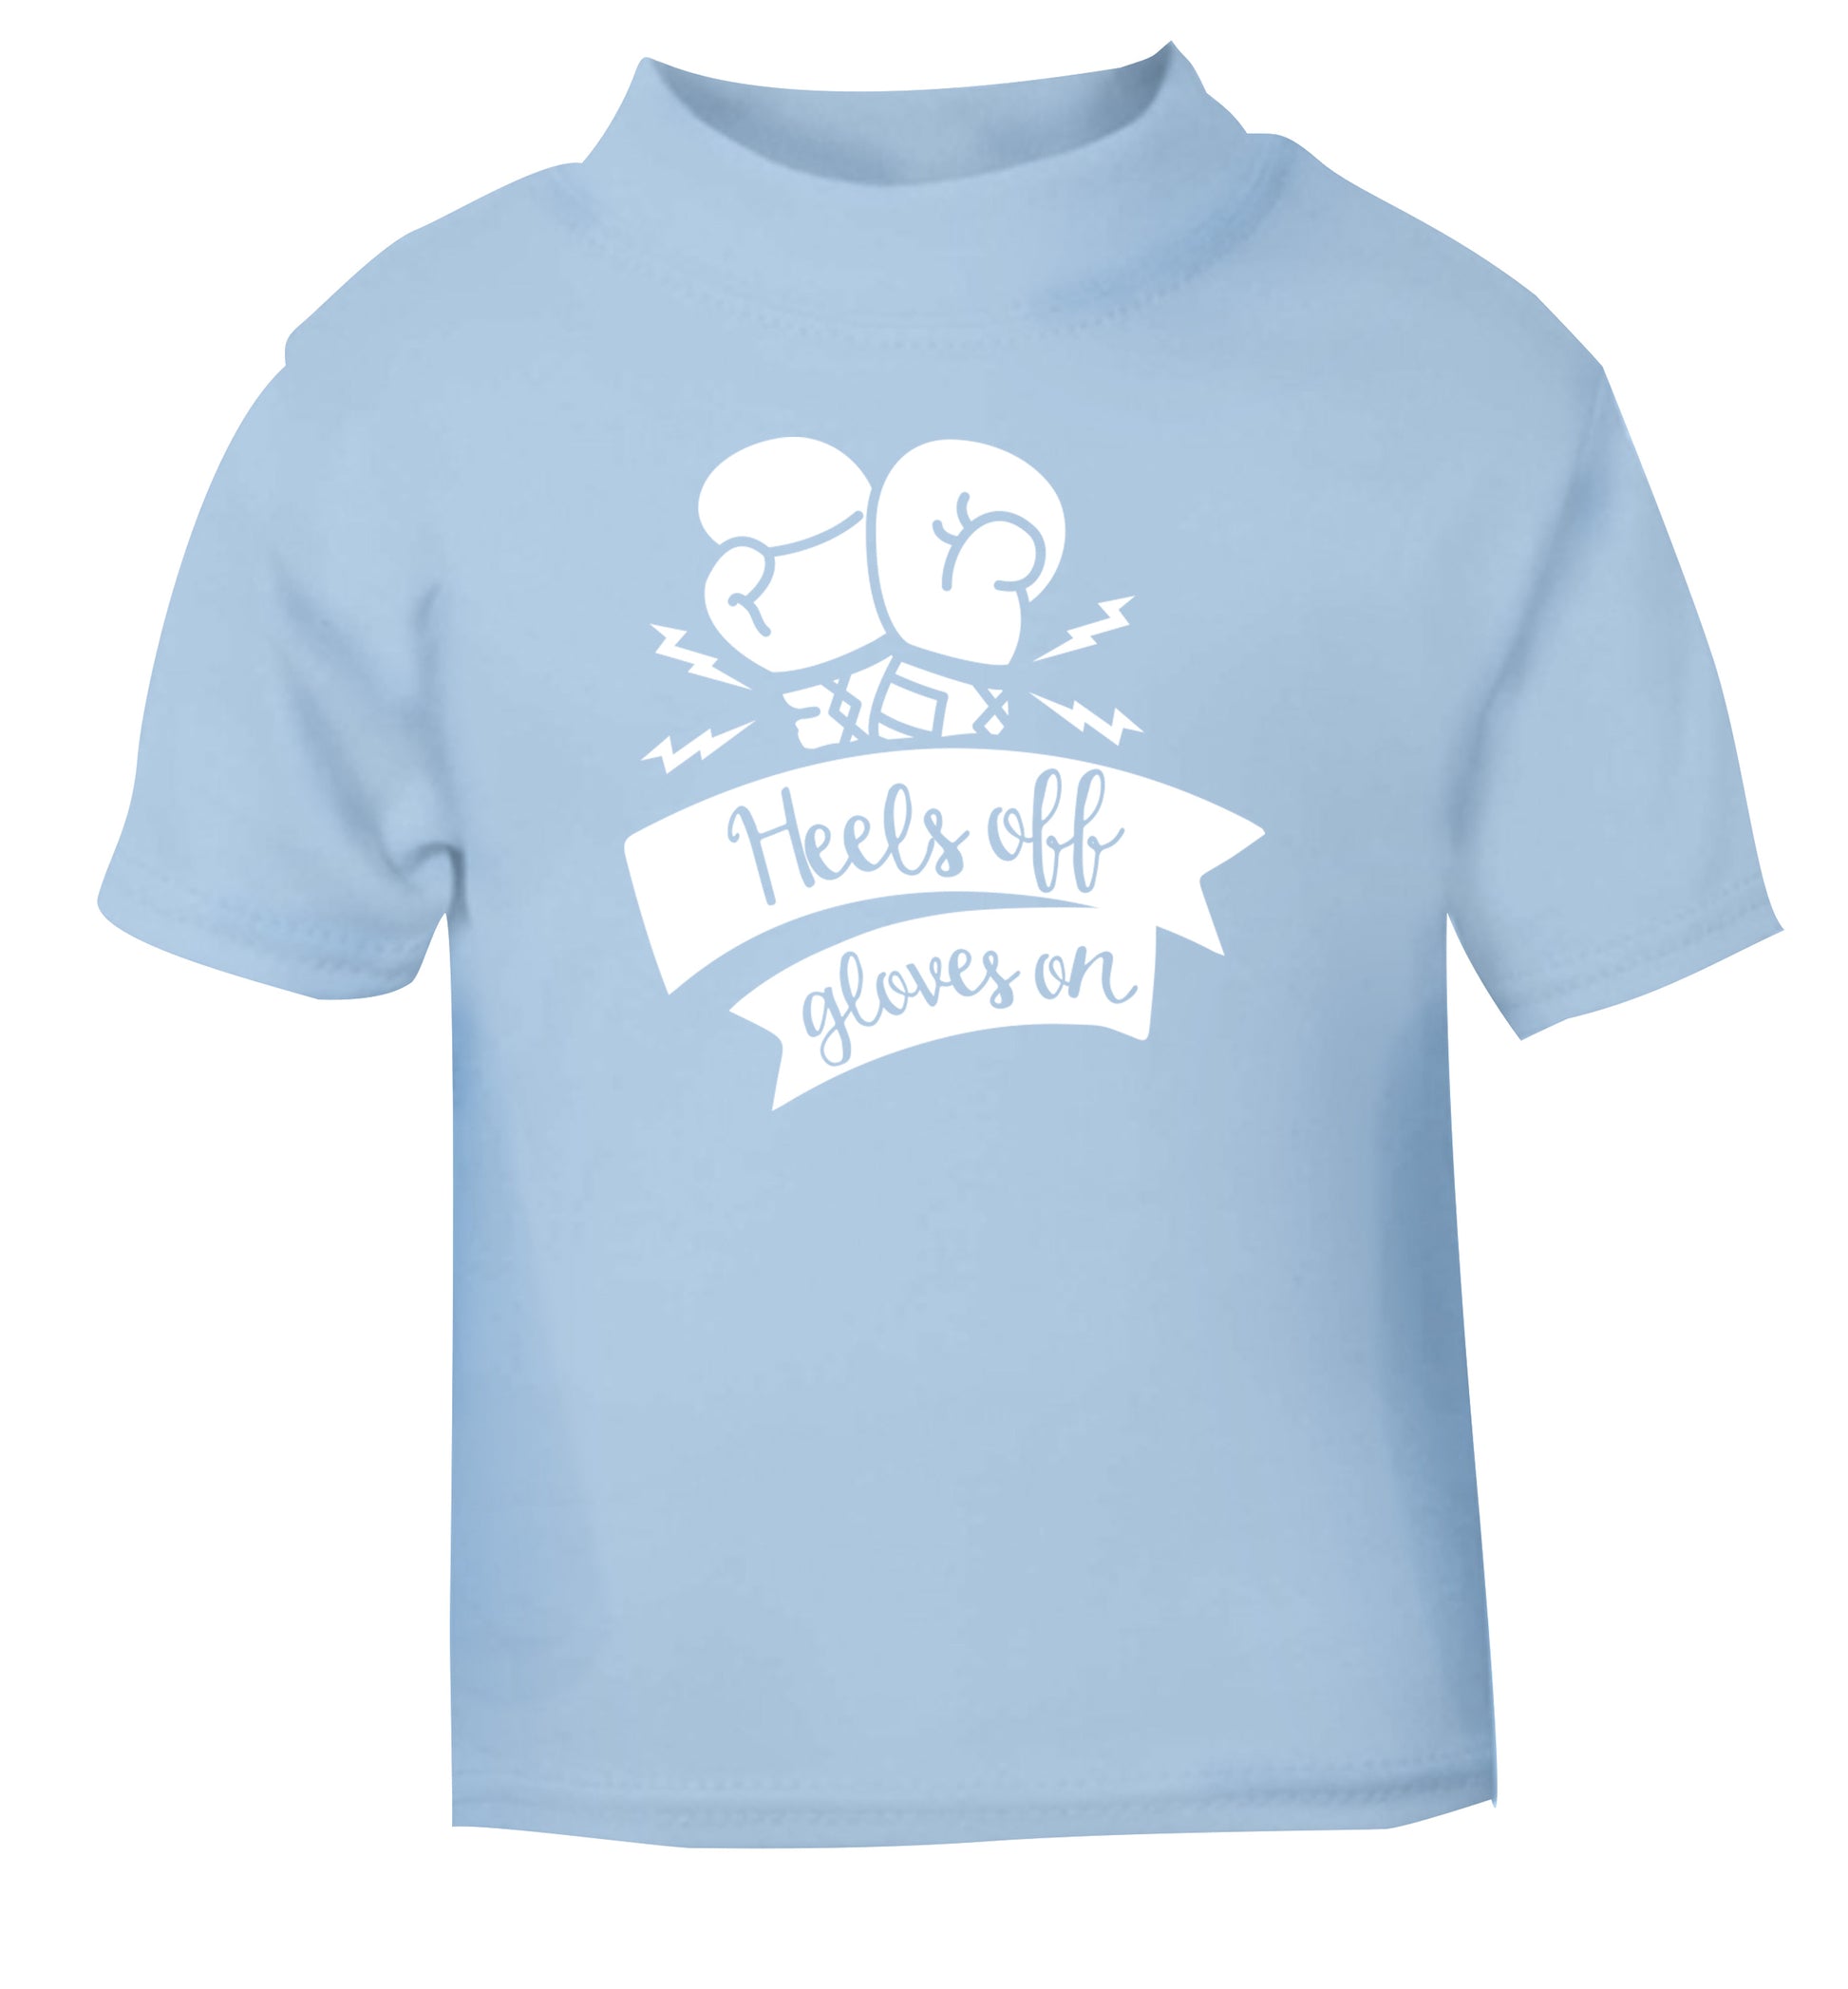 Heels off gloves on light blue Baby Toddler Tshirt 2 Years